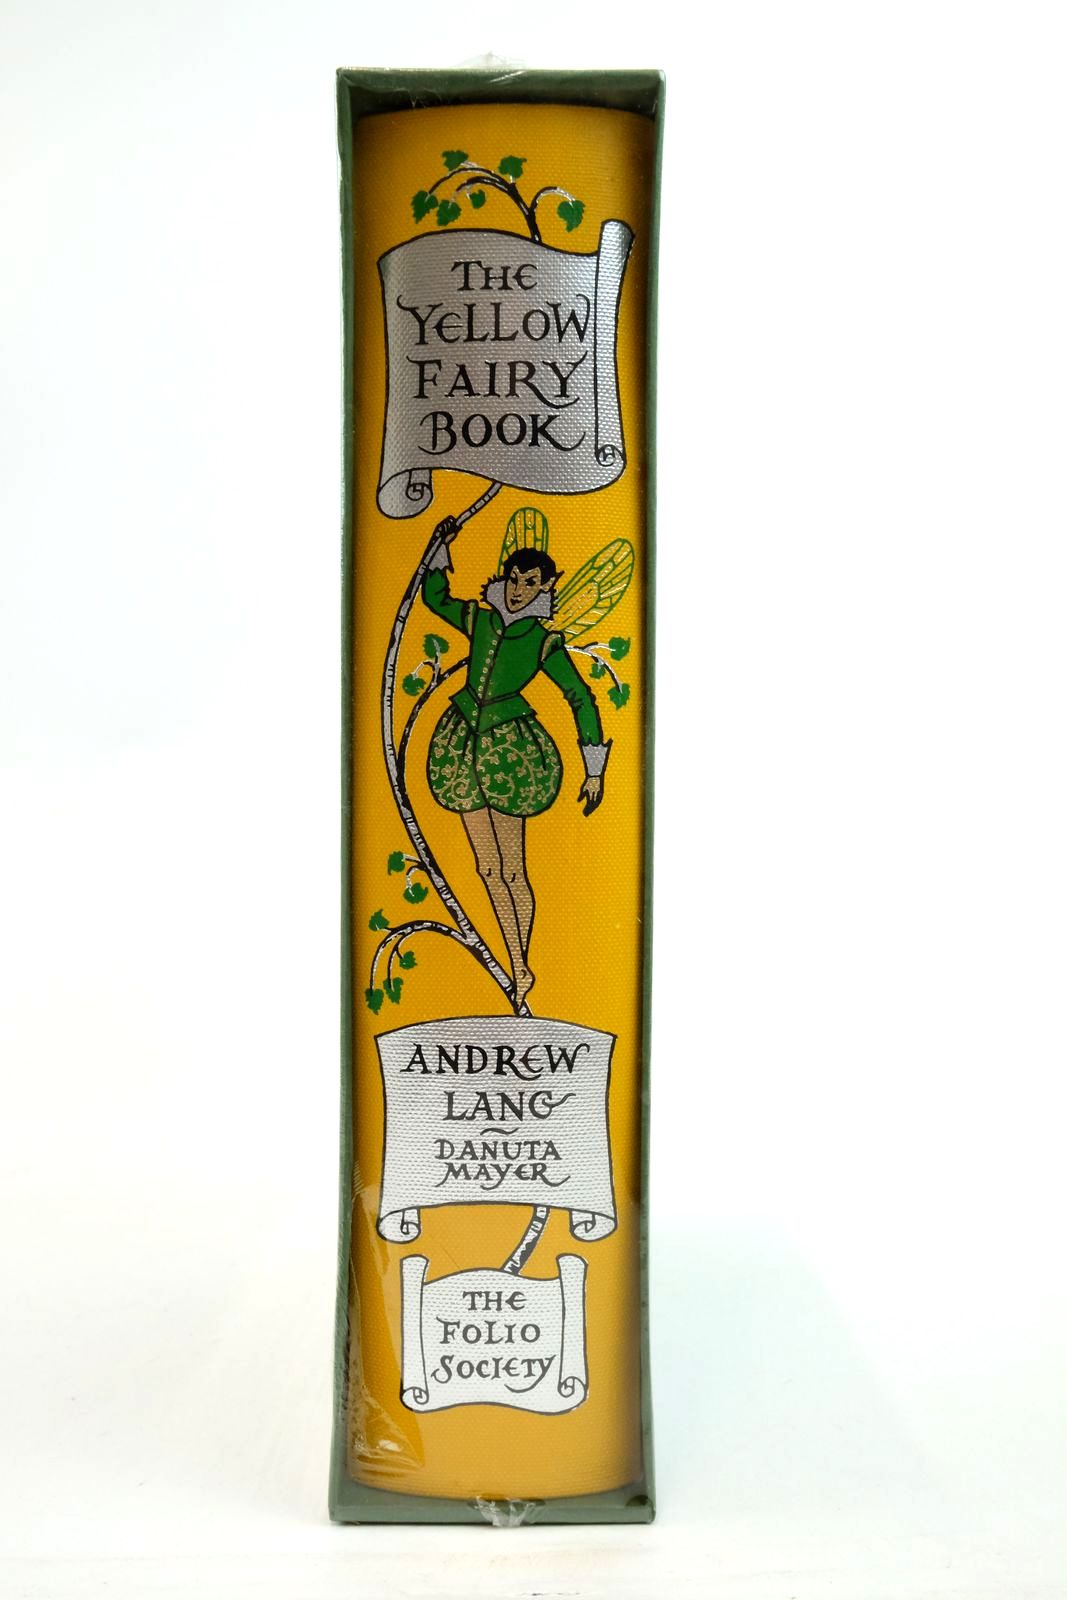 Photo of THE YELLOW FAIRY BOOK written by Lang, Andrew
Tatar, Maria illustrated by Mayer, Danuta published by Folio Society (STOCK CODE: 2137242)  for sale by Stella & Rose's Books